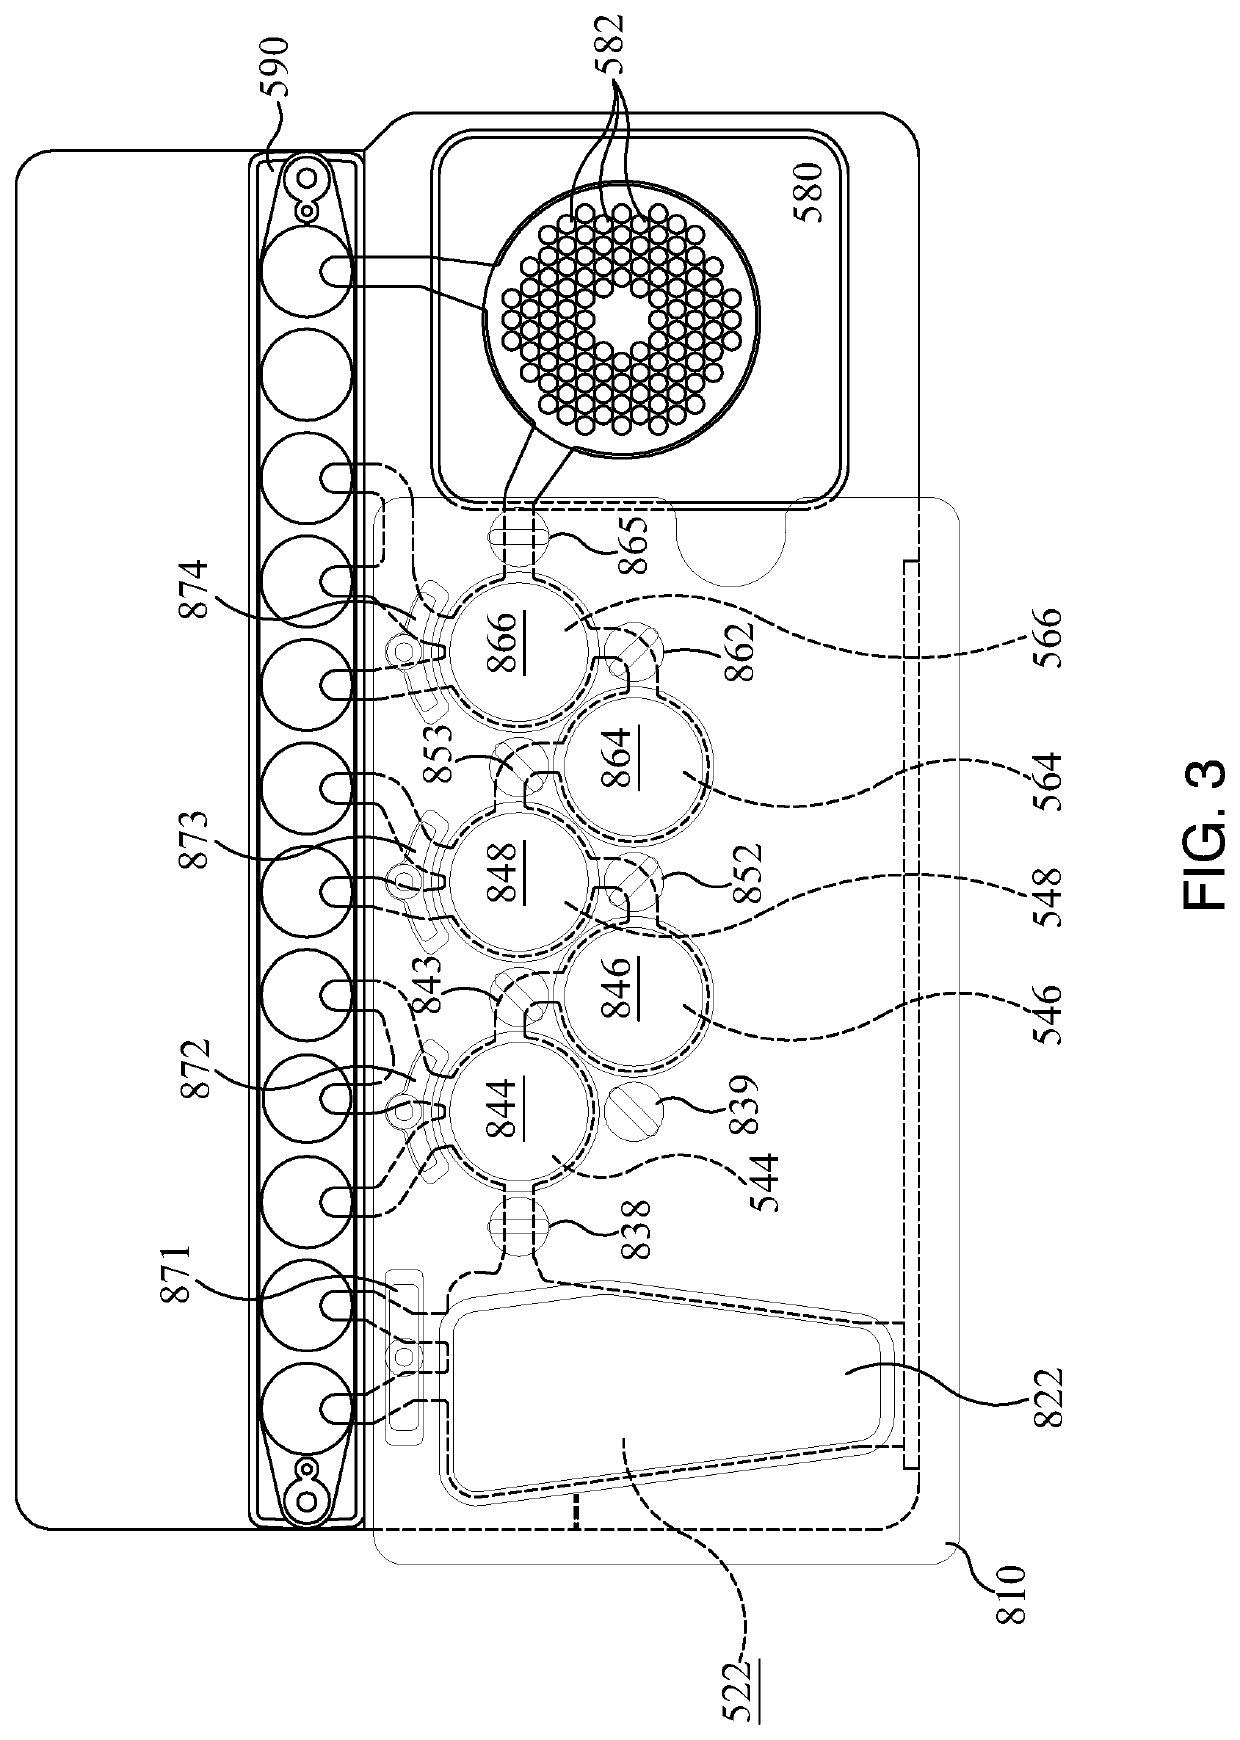 Systems and methods for point of use evacuation of an array